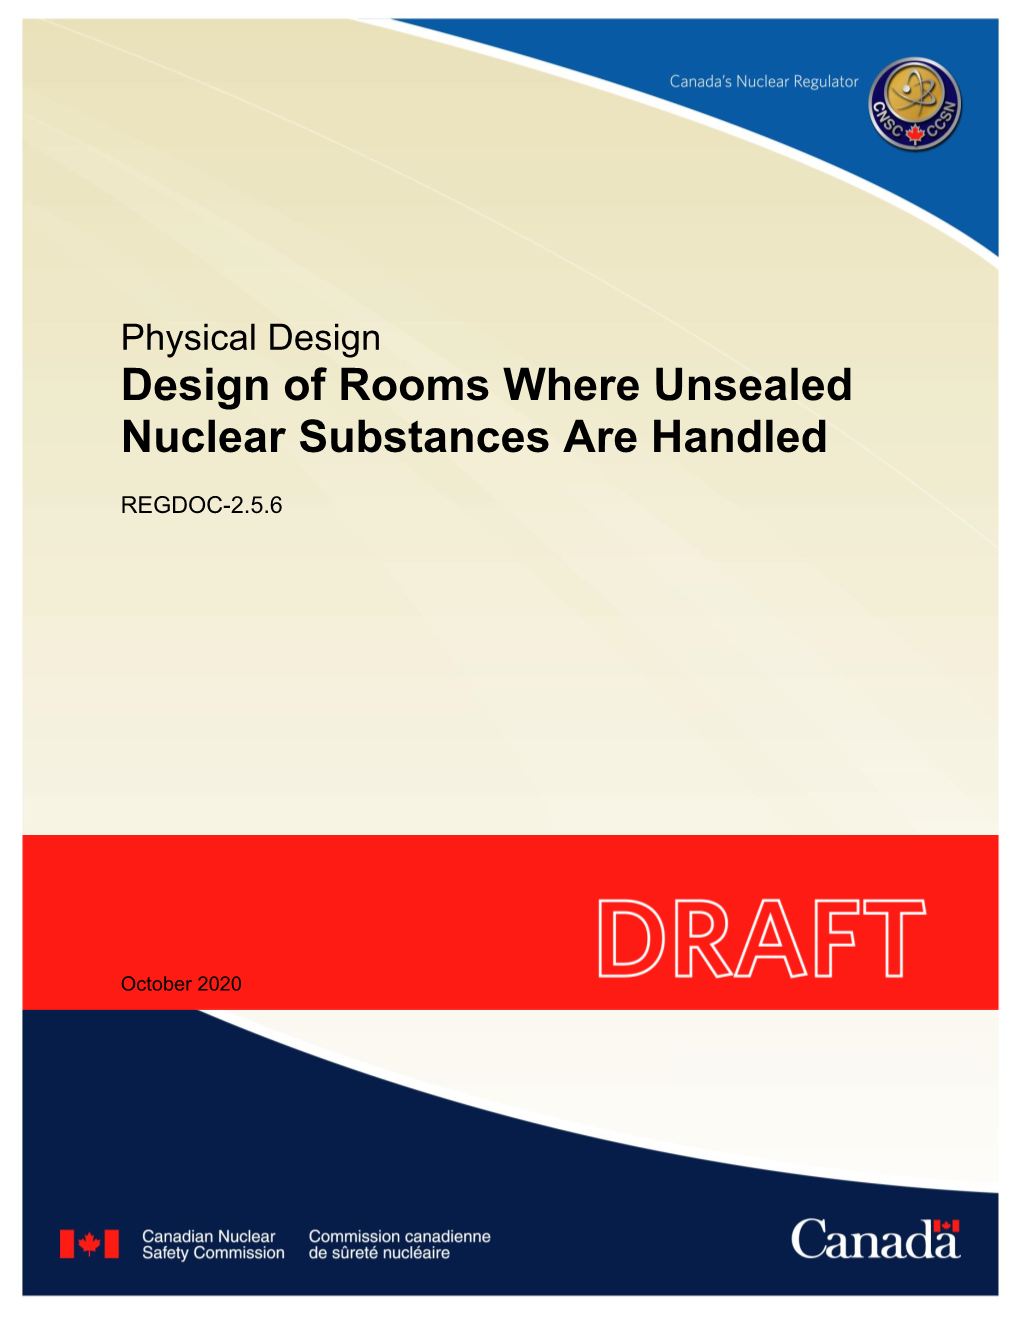 Design of Rooms Where Unsealed Nuclear Substances Are Handled